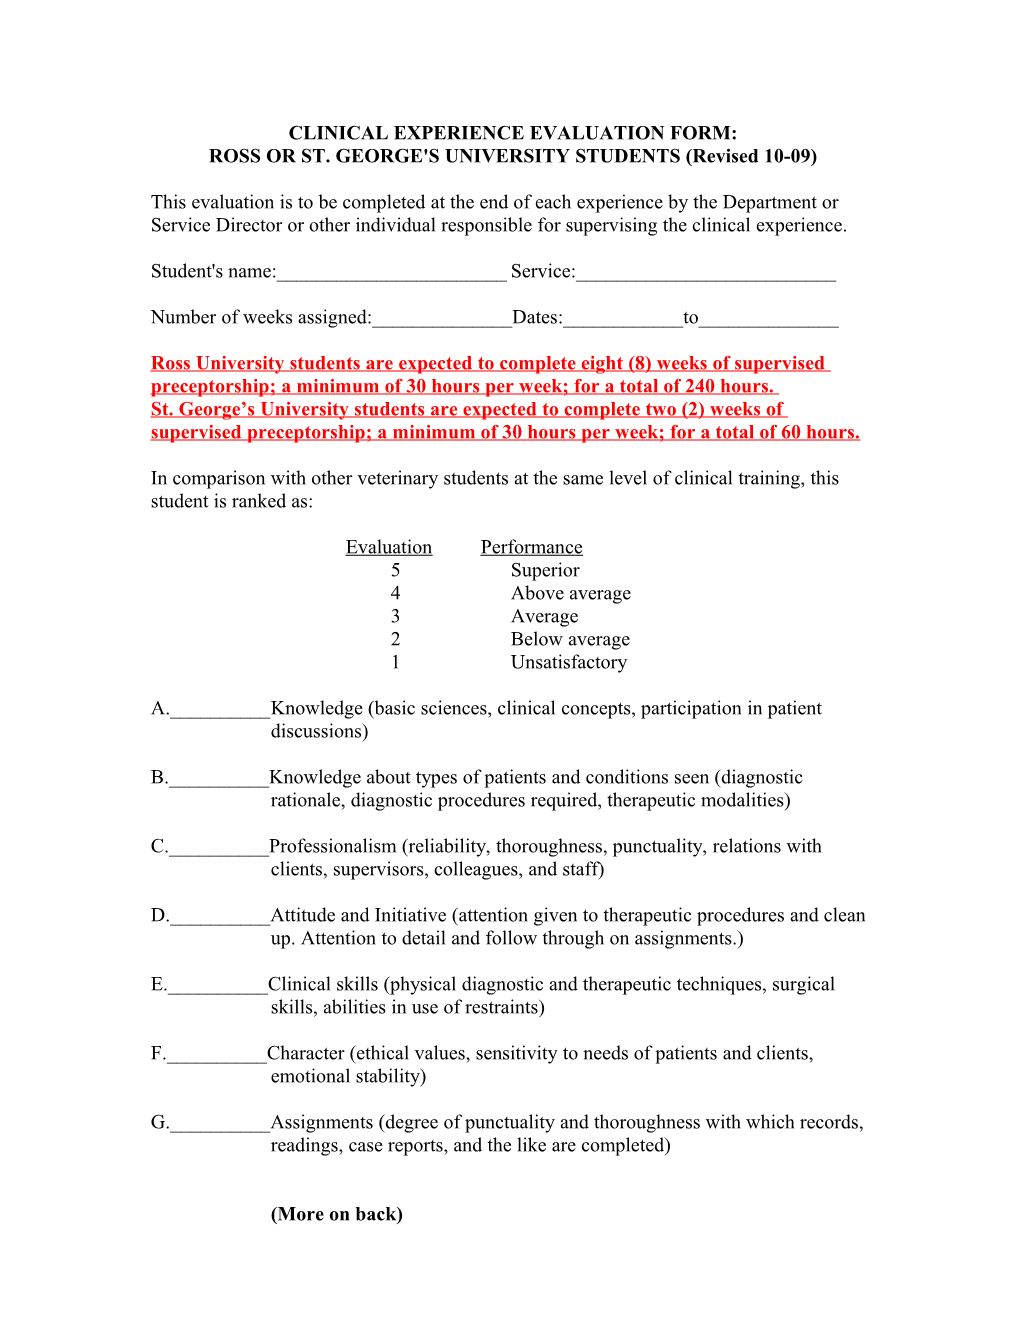 Clinical Experience Evaluation Form